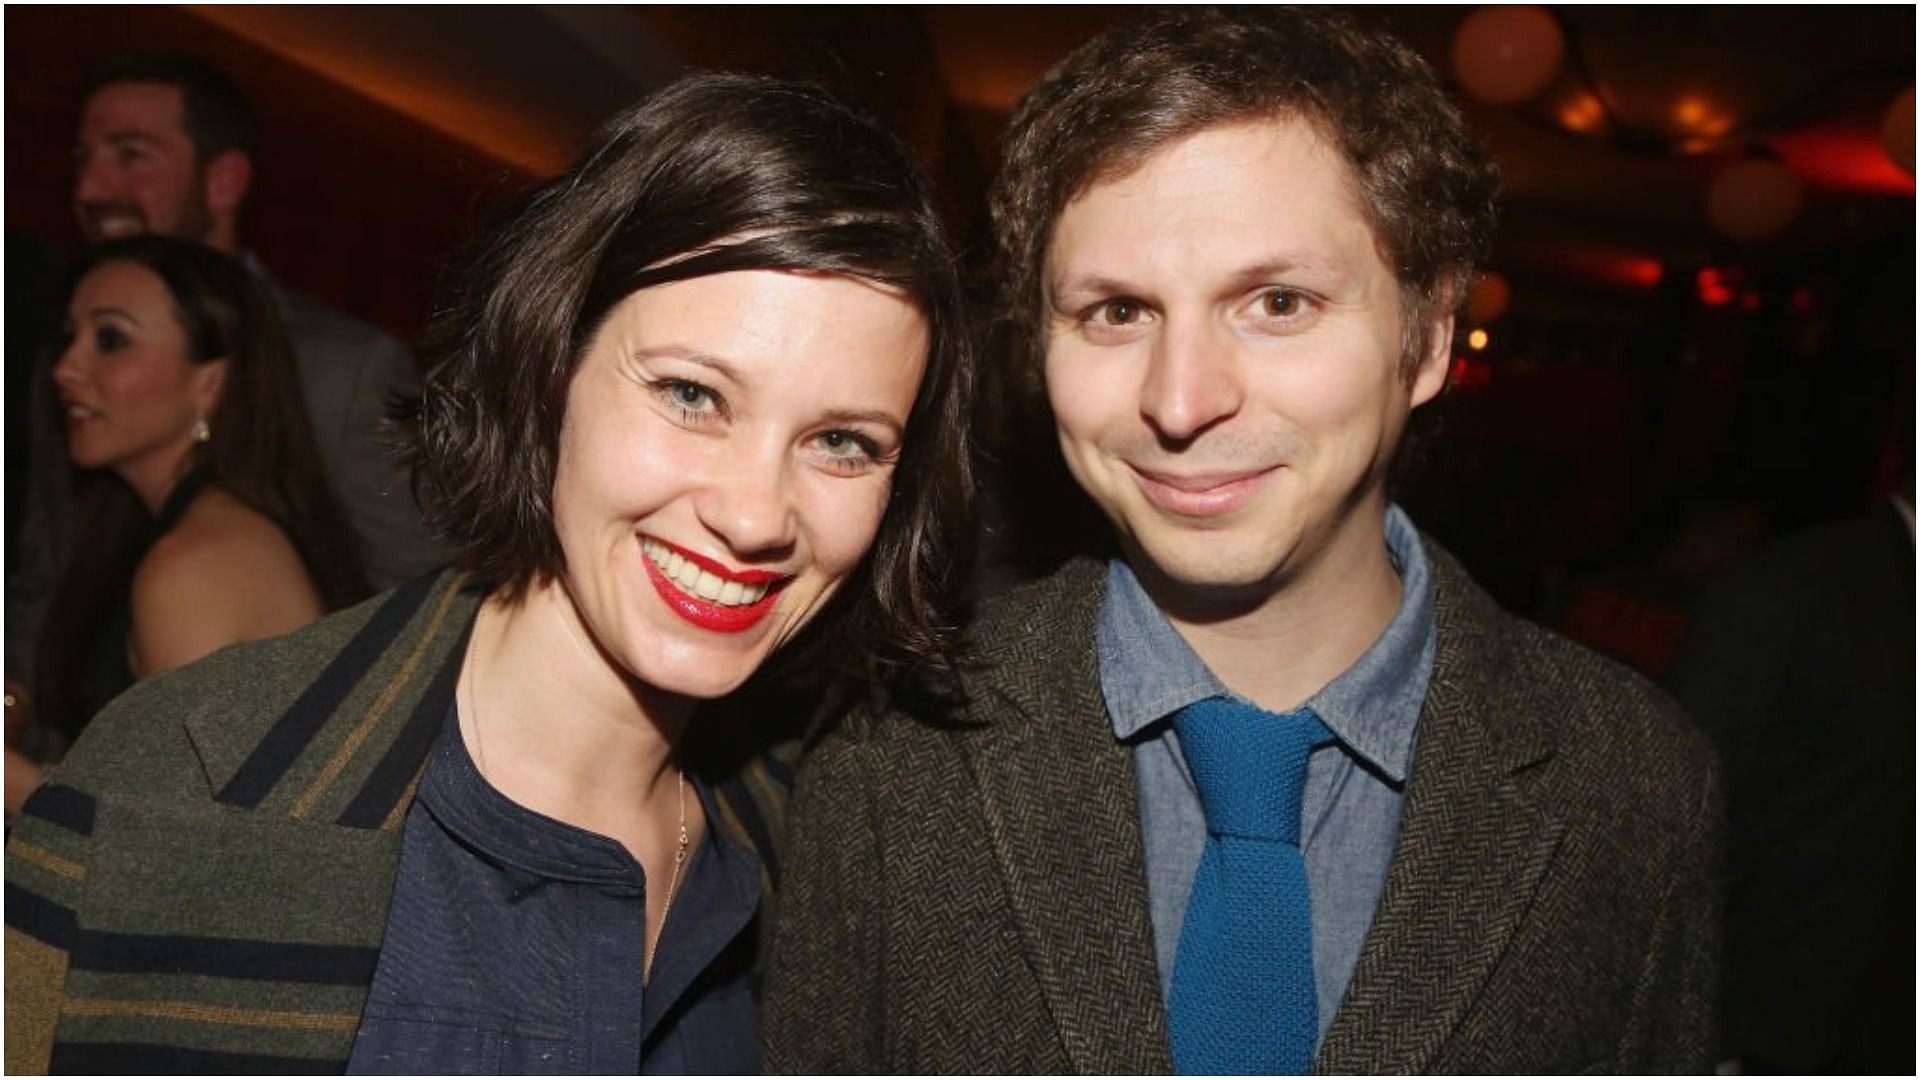 Michael Cera and Nadine reportedly tied the knot in 2018 (Image via Bruce Glikas/Getty Images)